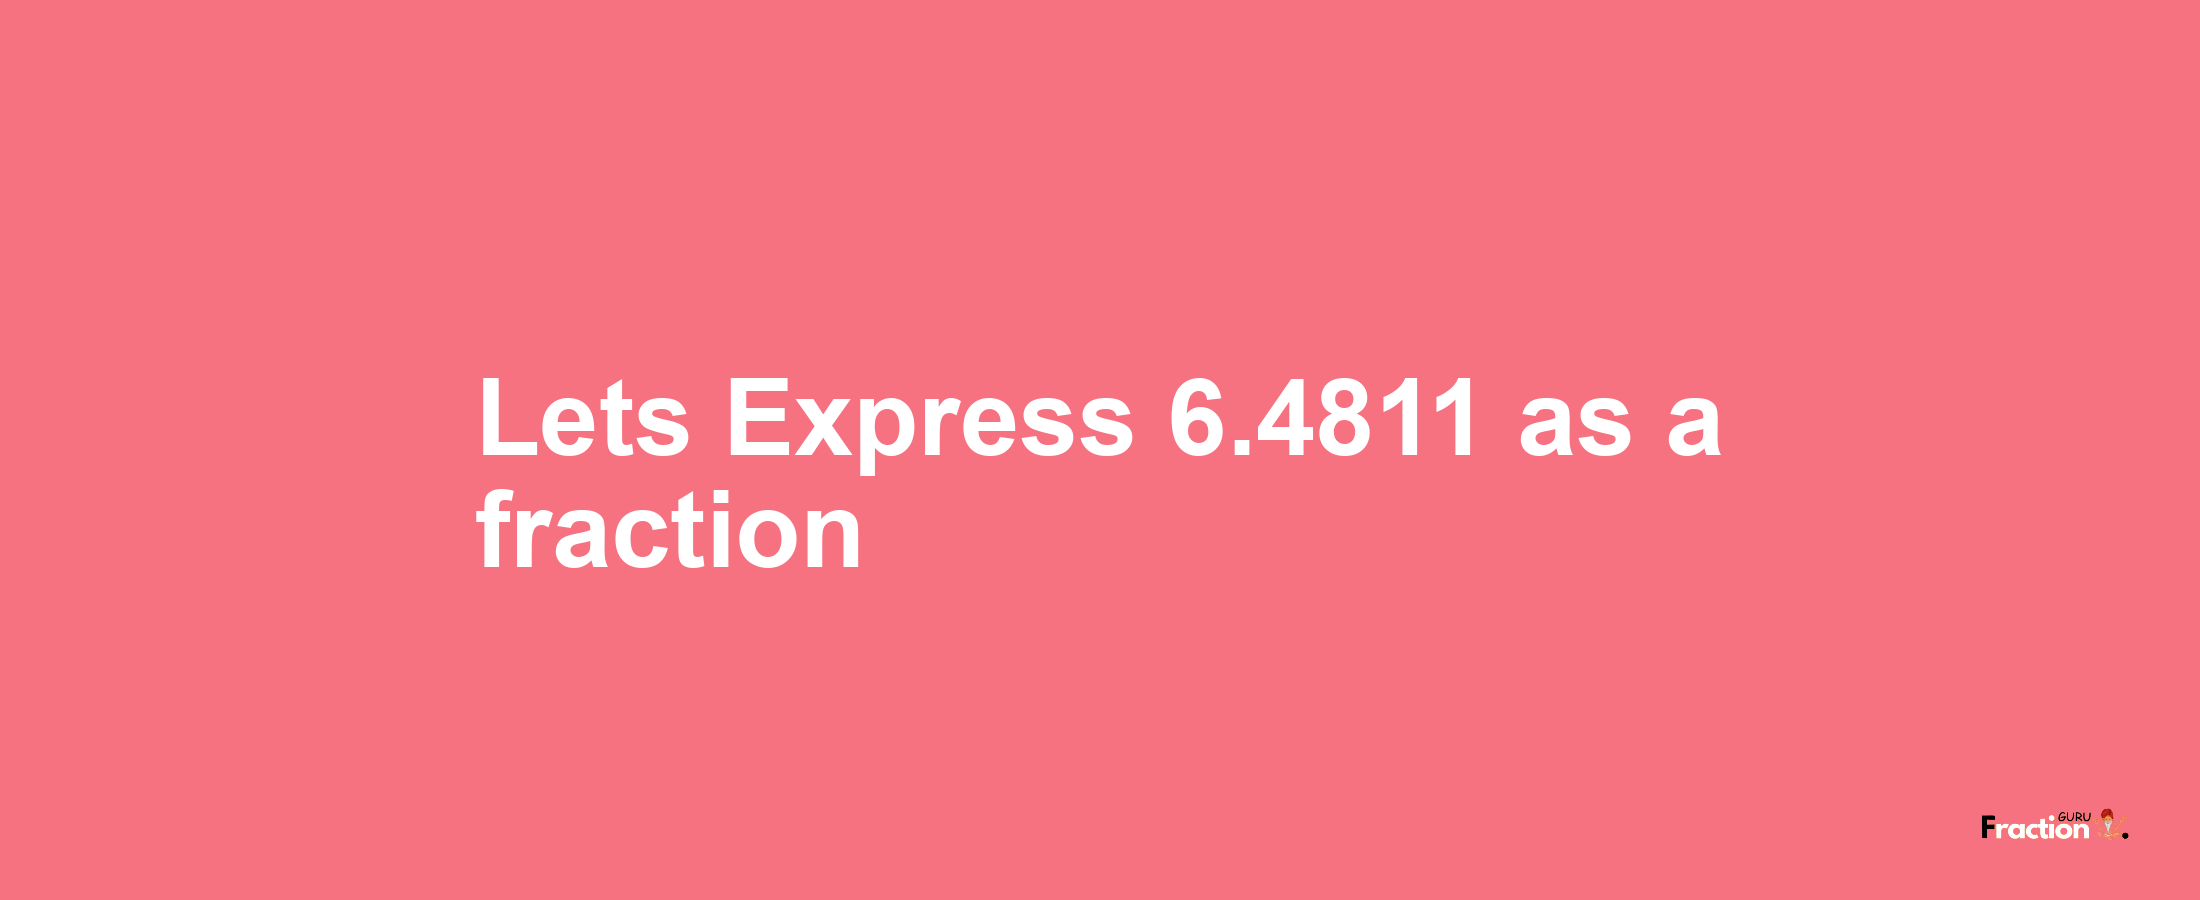 Lets Express 6.4811 as afraction